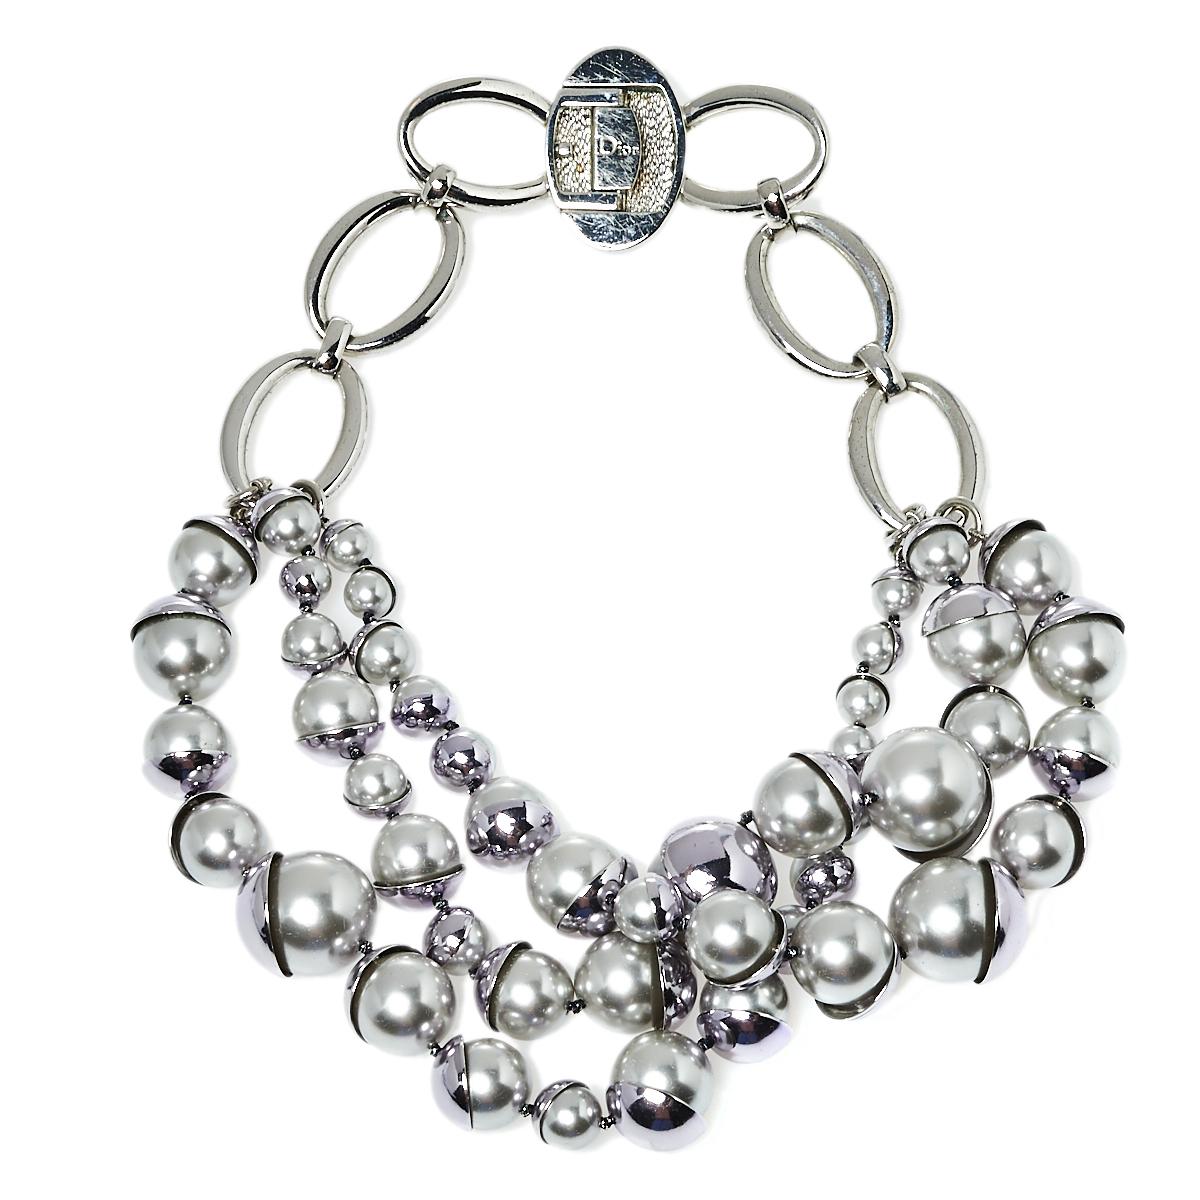 This necklace is just the accessory for a fashionable soul like yourself! From their Mise en Dior collection, this Dior necklace is designed to be flaunted. It is crafted from silver-tone metal and carries strands of faux beads. This piece will make